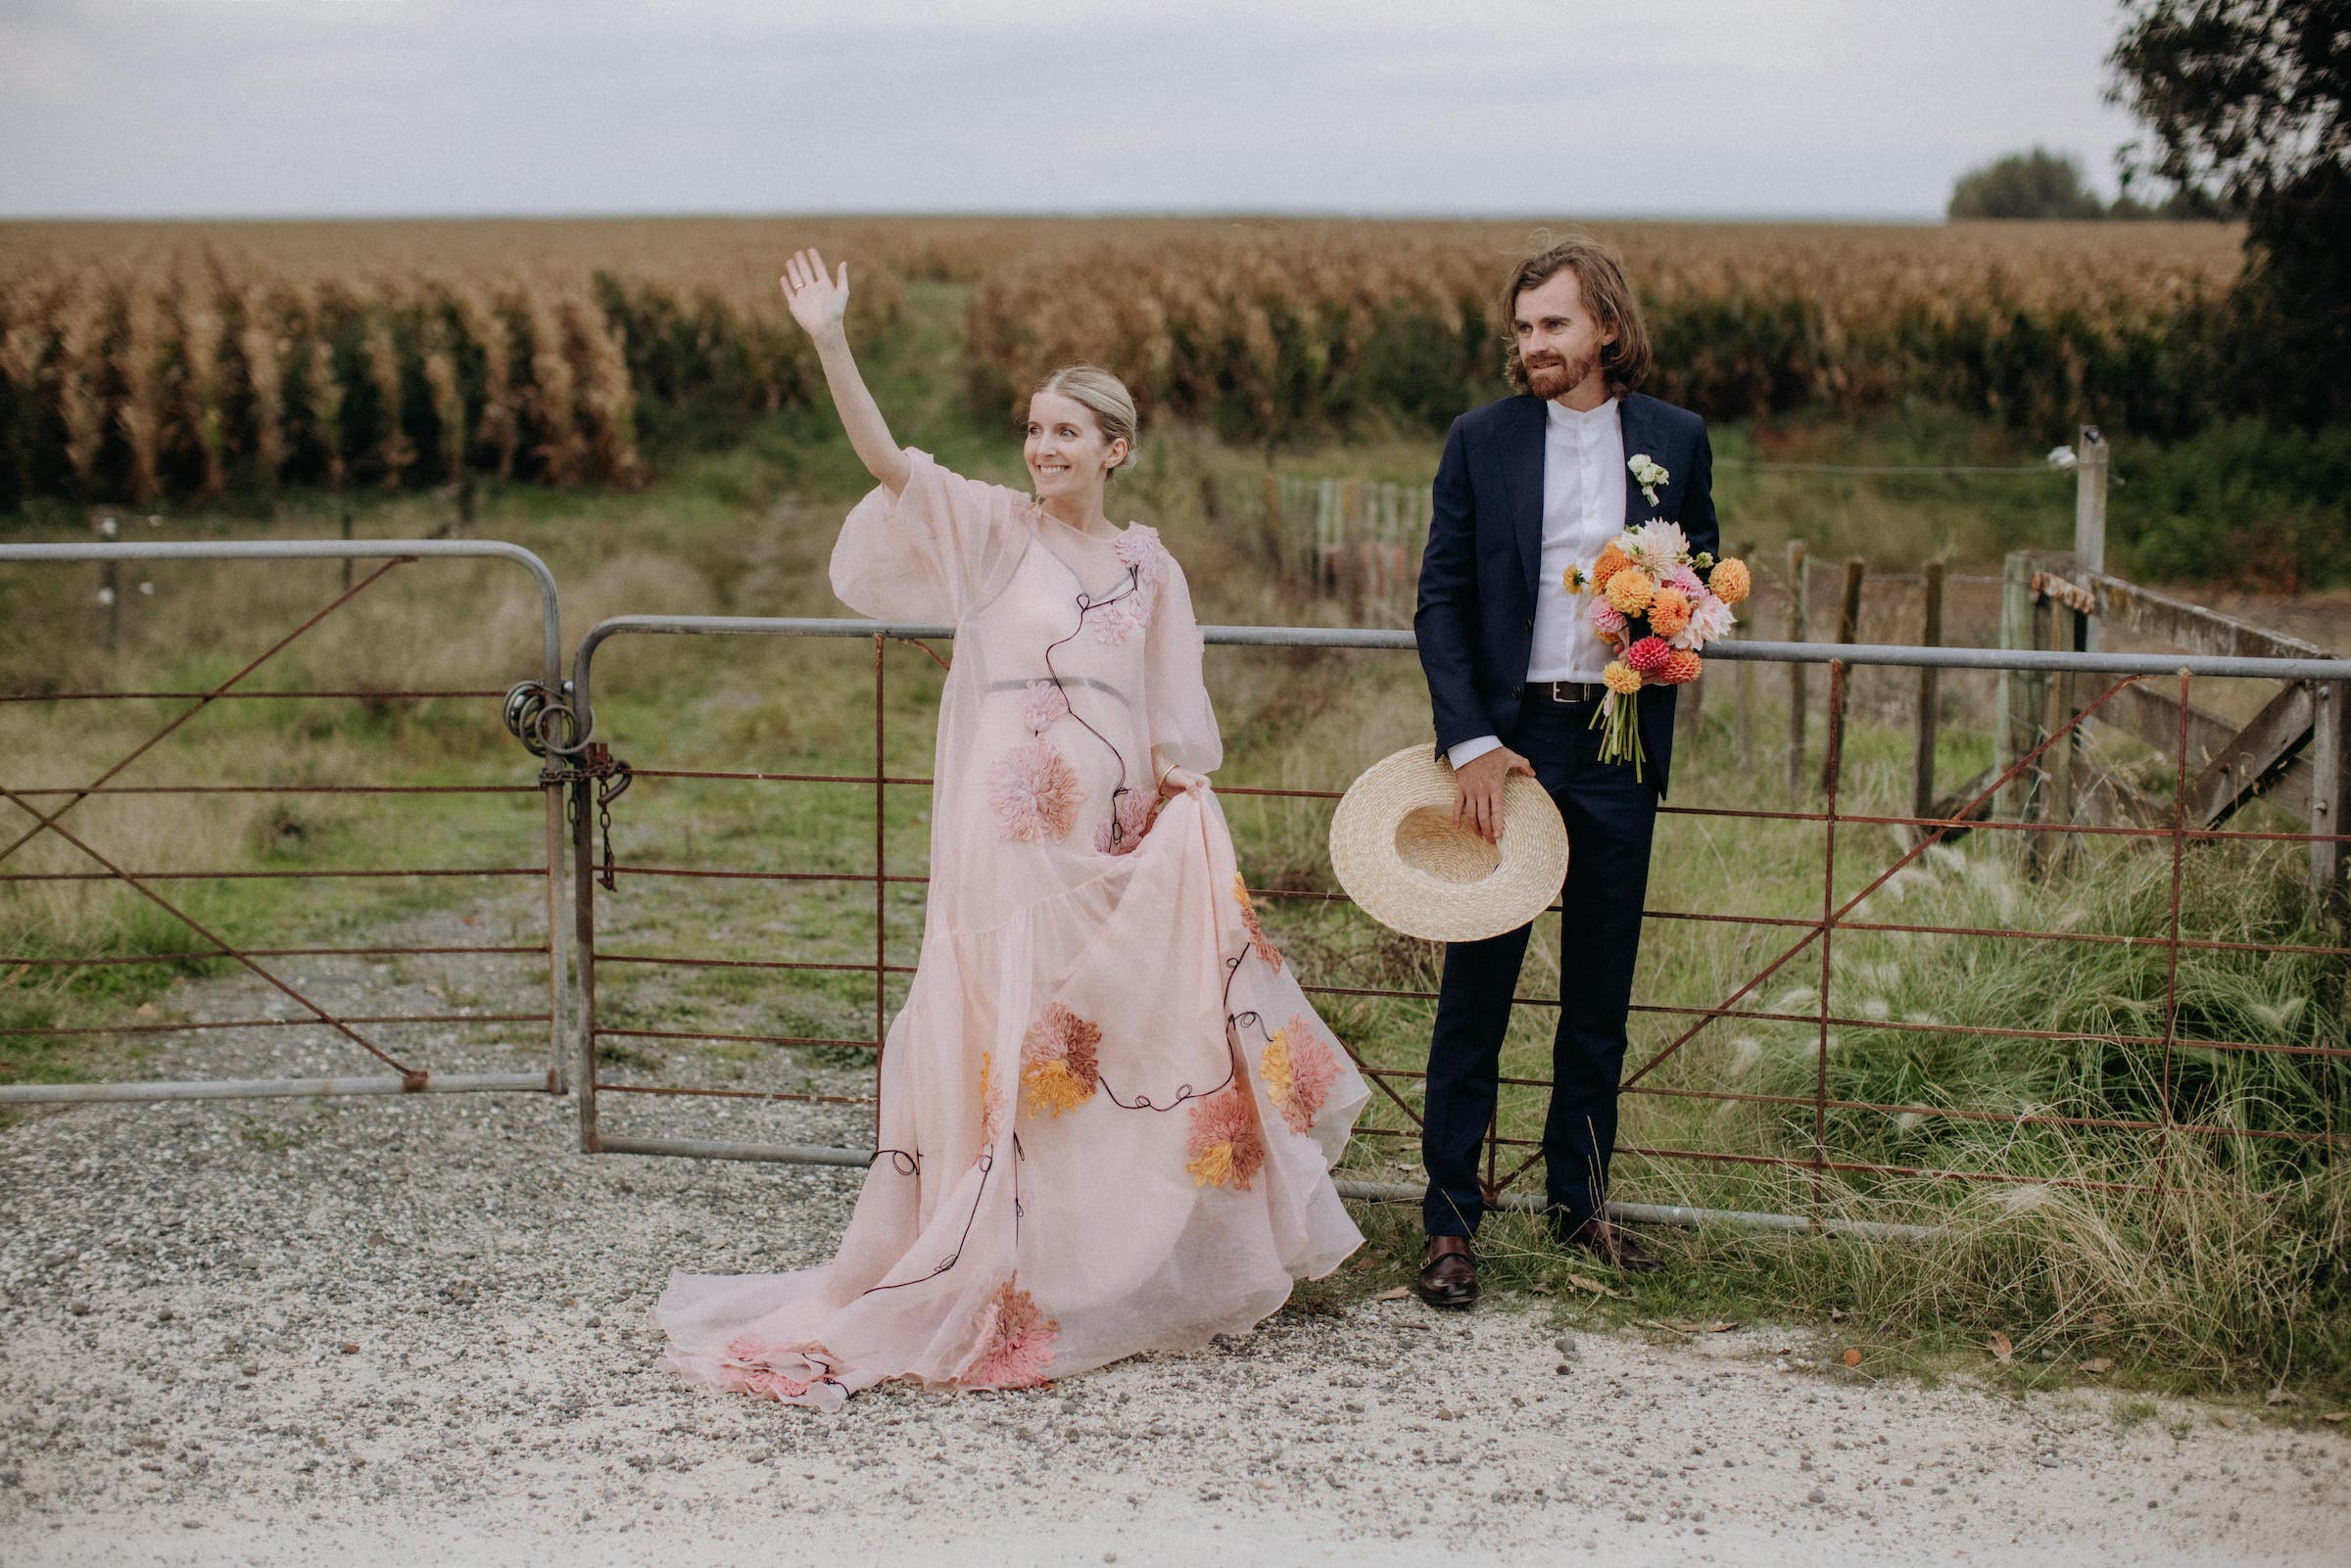 Bride wears couture blush wedding gown and groom stands next to her at a farm gate as they wave at someone. Hawkes Bay Wedding Ana Galloway Photography